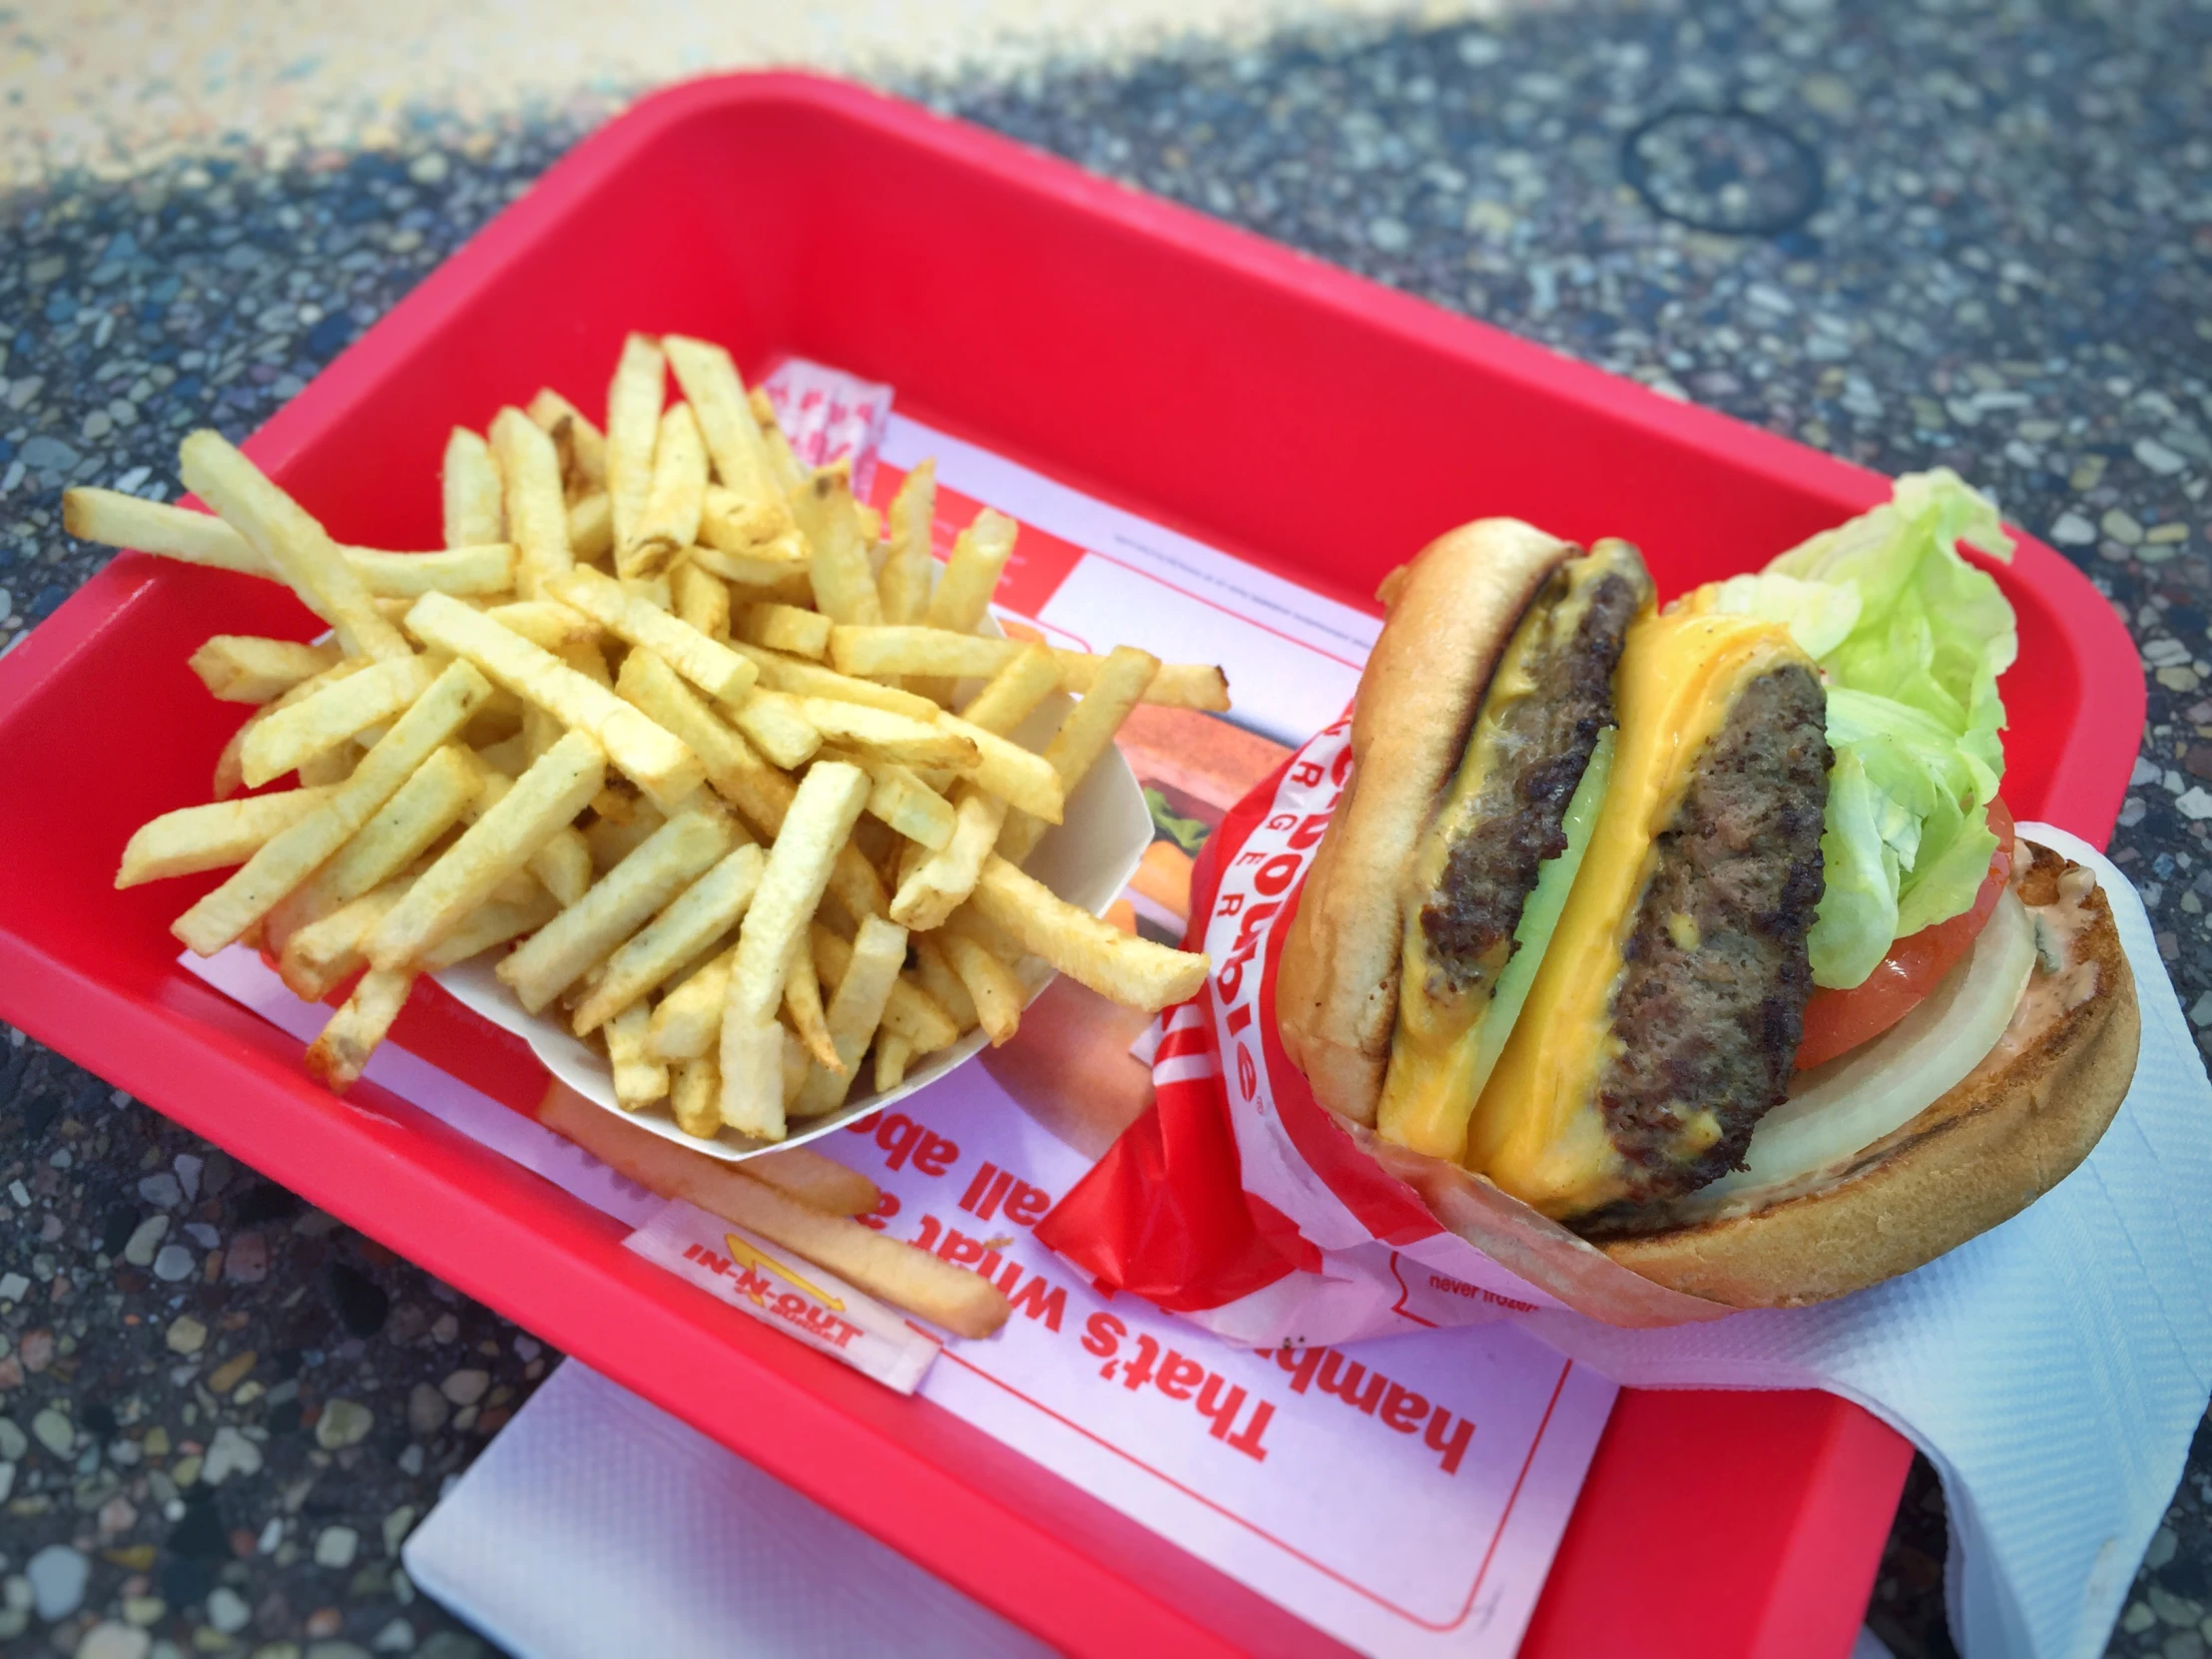 a red tray with a large burger and fries